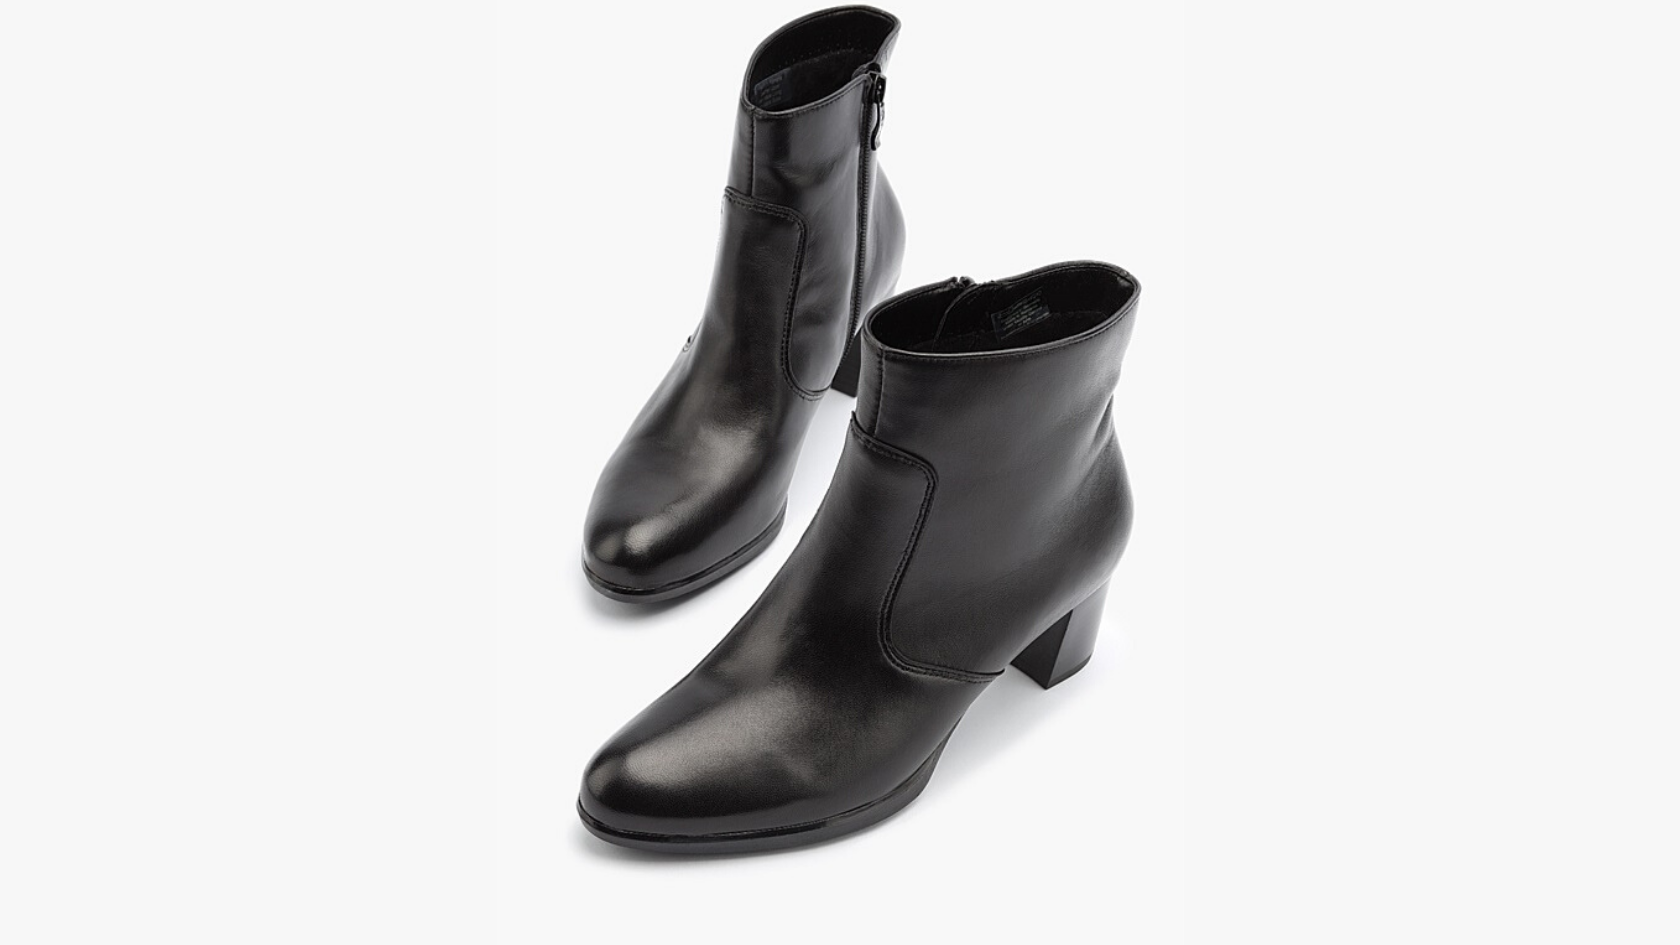 A pair of Ara women’s heeled black leather ankle boots against a neutral background.    